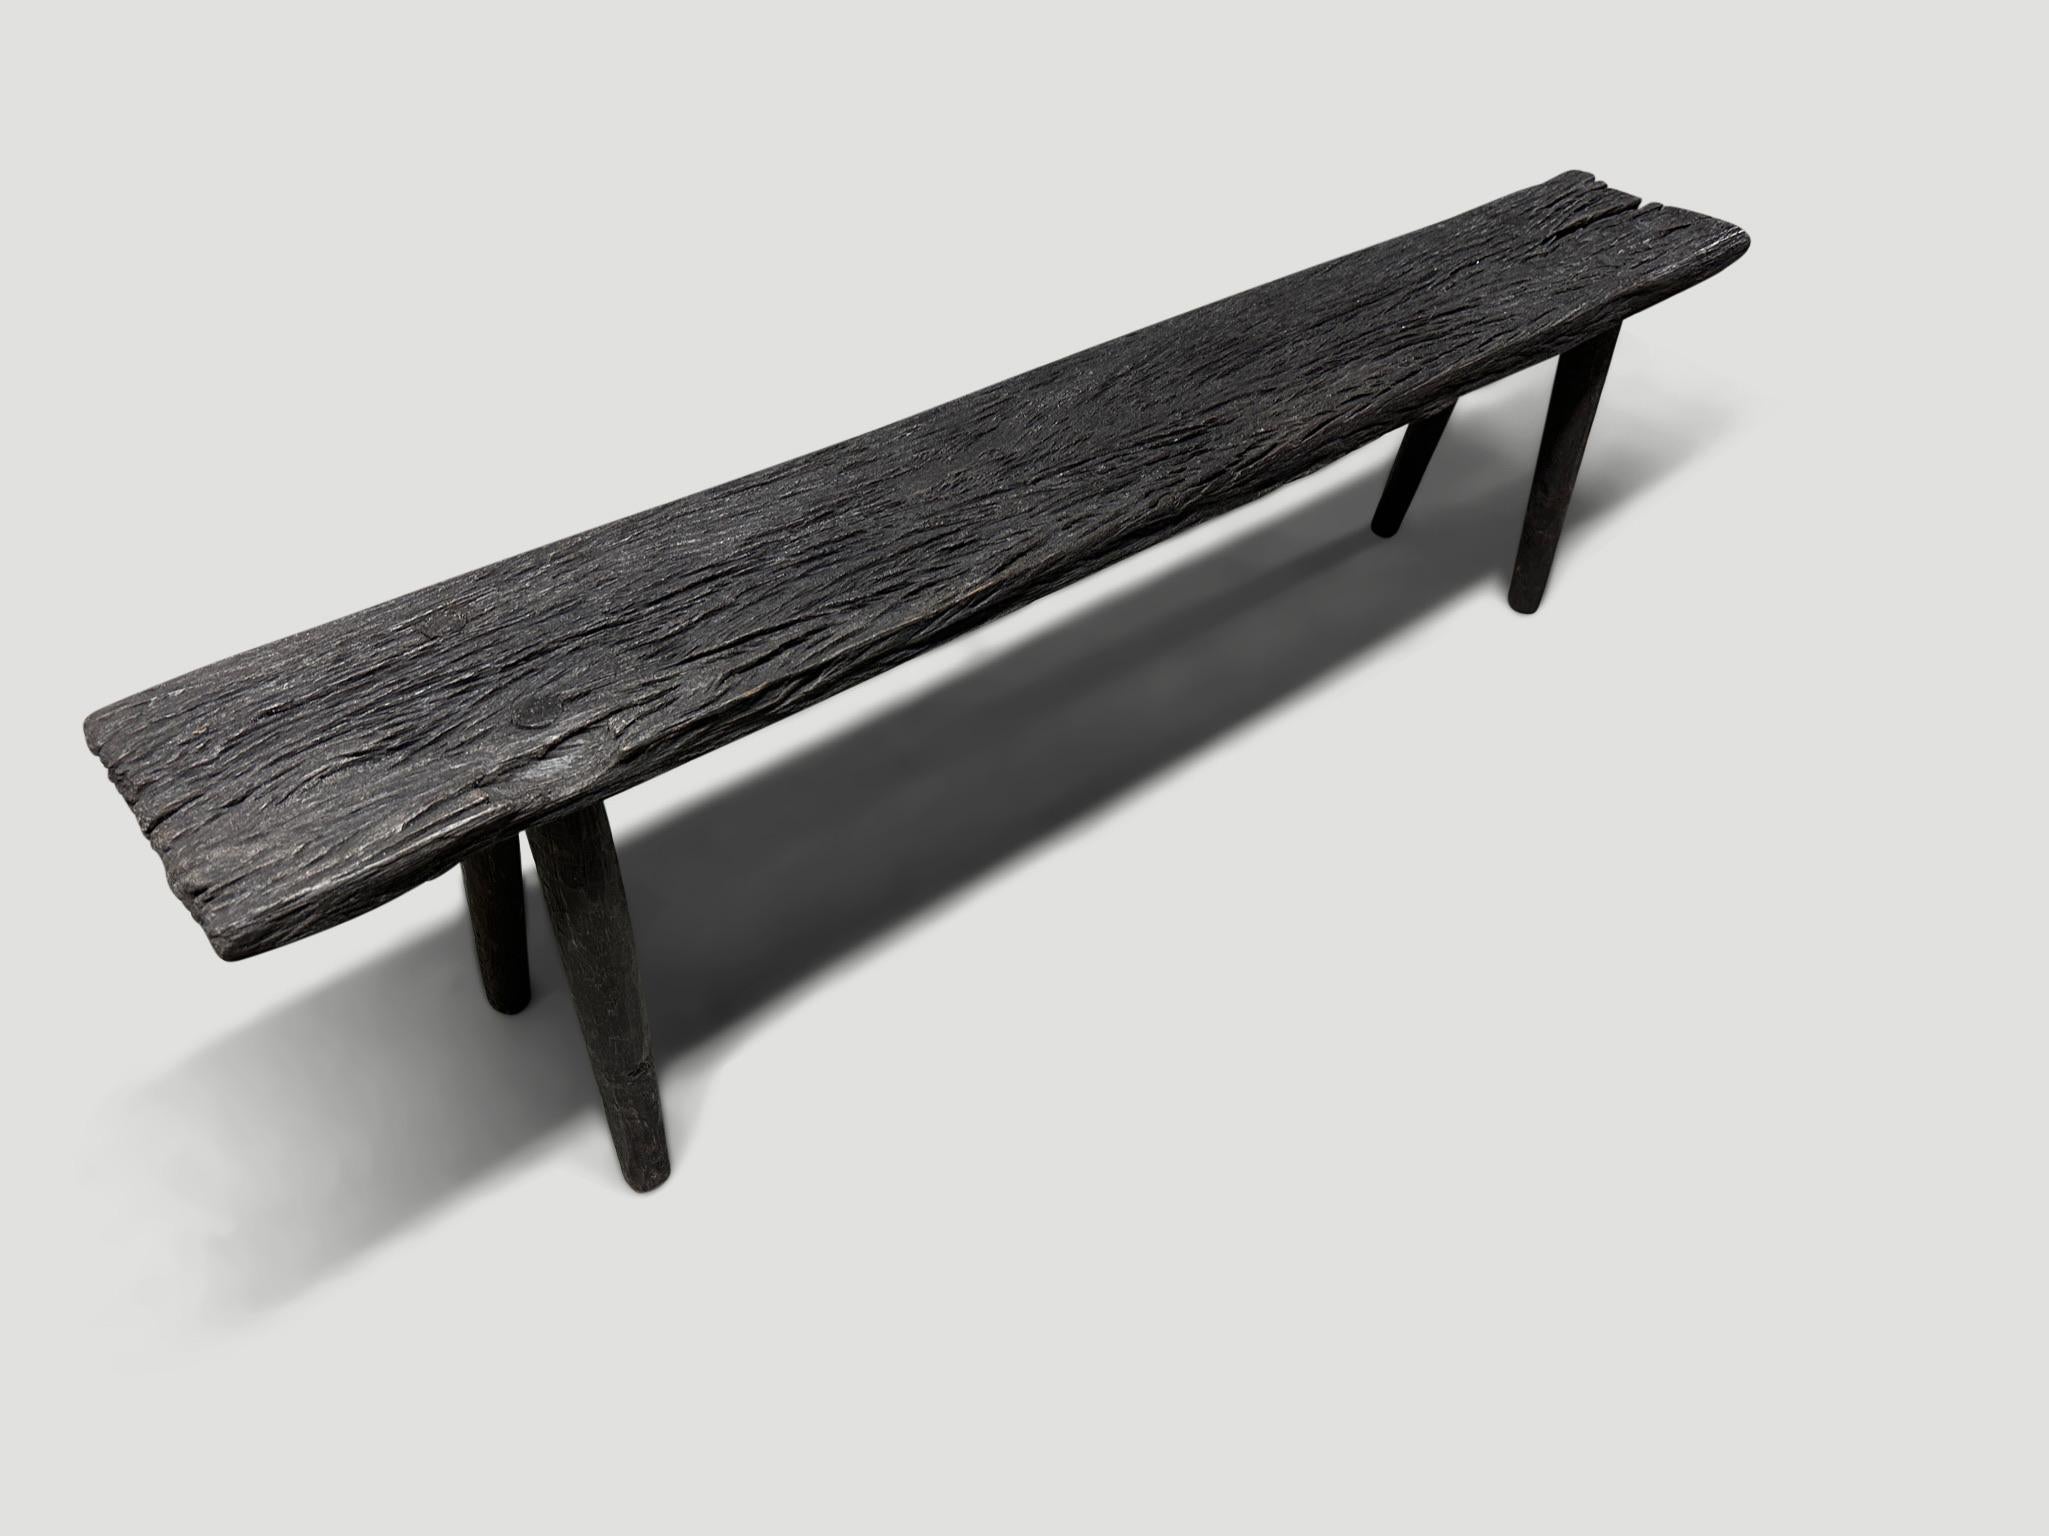 Beautiful minimalist iron wood bench, also known as Ulin wood. Charred sanded and sealed revealing the beautiful wood grain. We added smooth teak cylinder minimalist legs. It’s all in the details.

The Triple Burnt Collection represents a unique